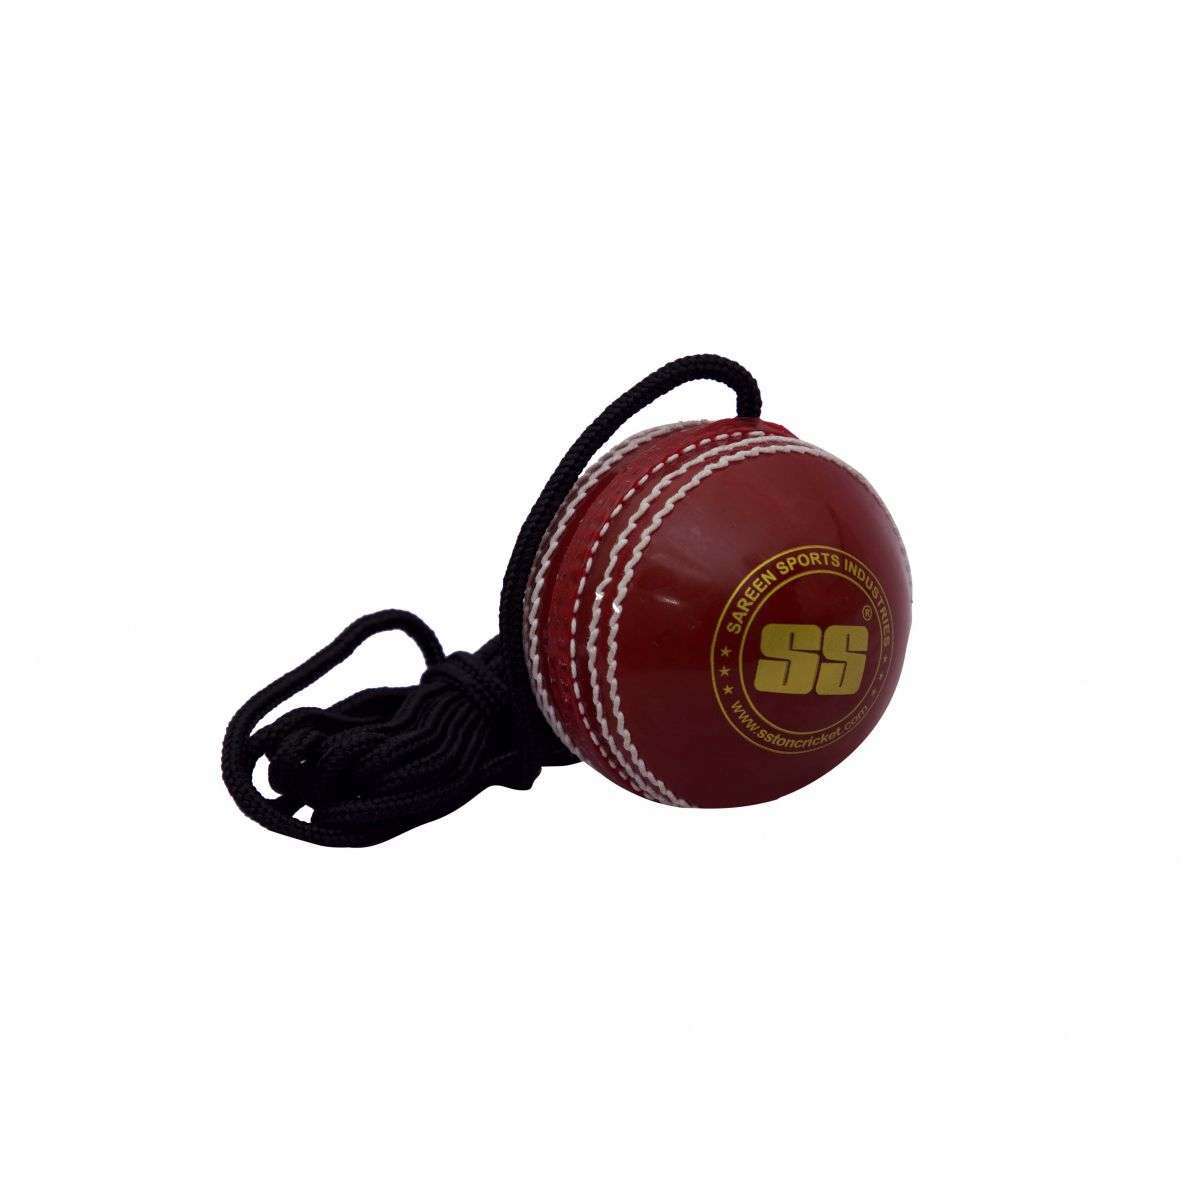 SS Cordy Seamer Hanging Cricket Ball with String for Training